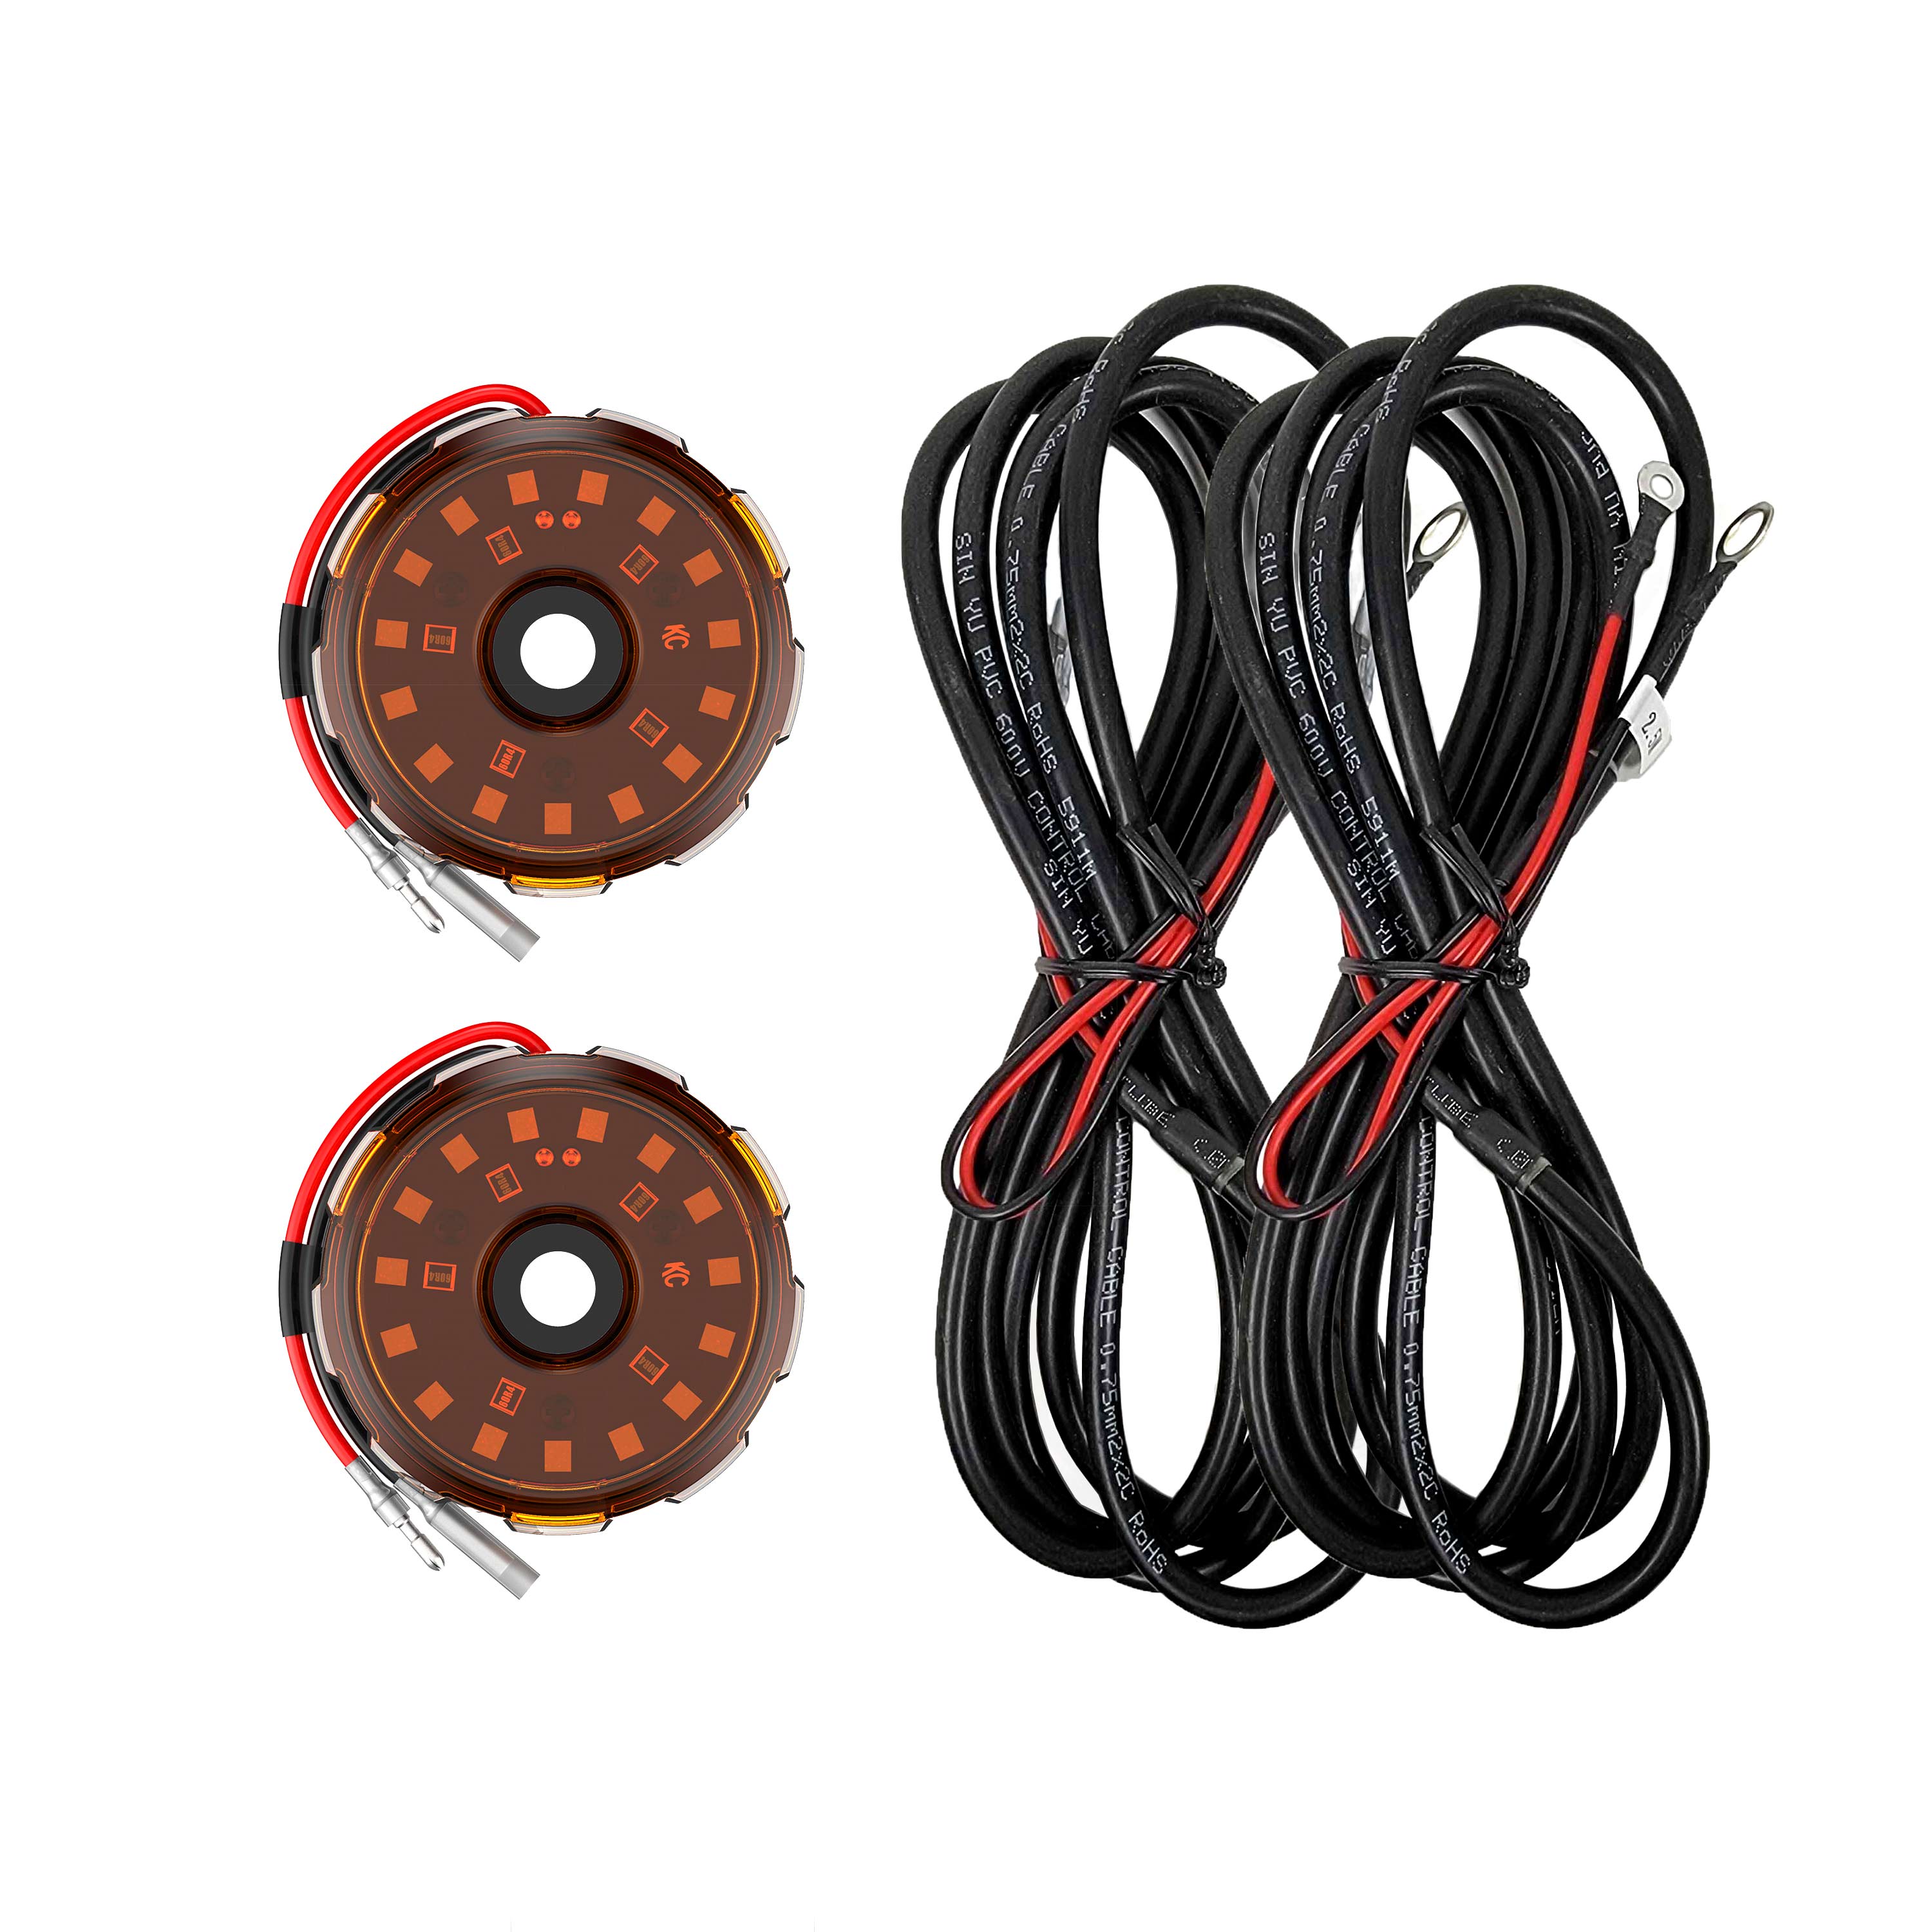 Two-Light Add-On Cyclone V2 Kit - Amber - 2.5 Meters Long - #6332